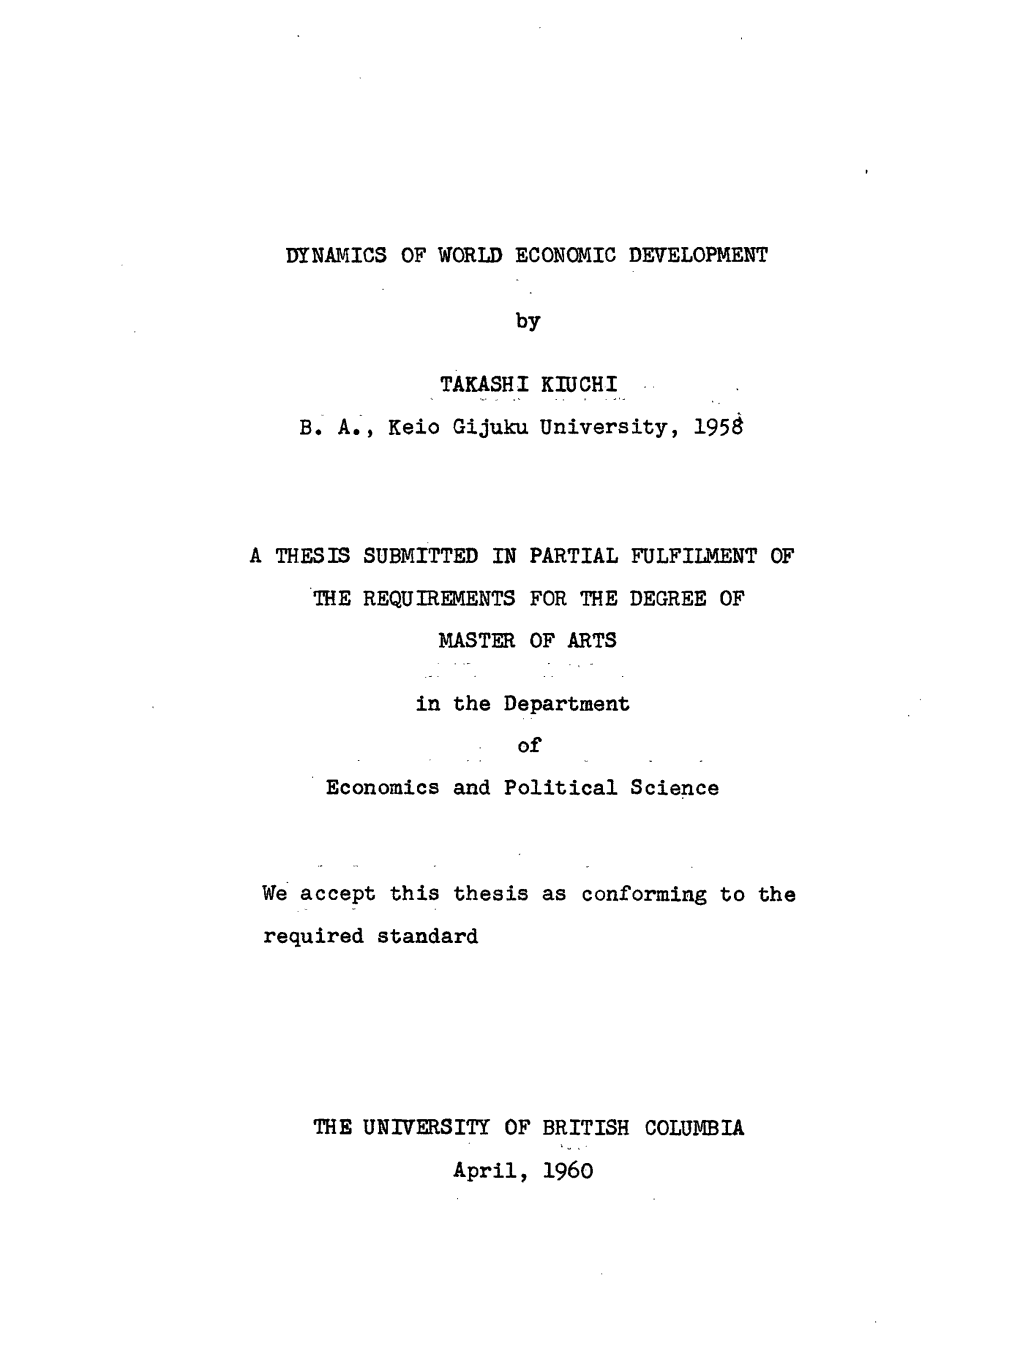 DYNAMICS of WORLD ECONOMIC DEVELOPMENT by TAKASHI KIUCHI B. A., Keio Gijuku University, 195S a THESIS SUBMITTED in PARTIAL FULFI